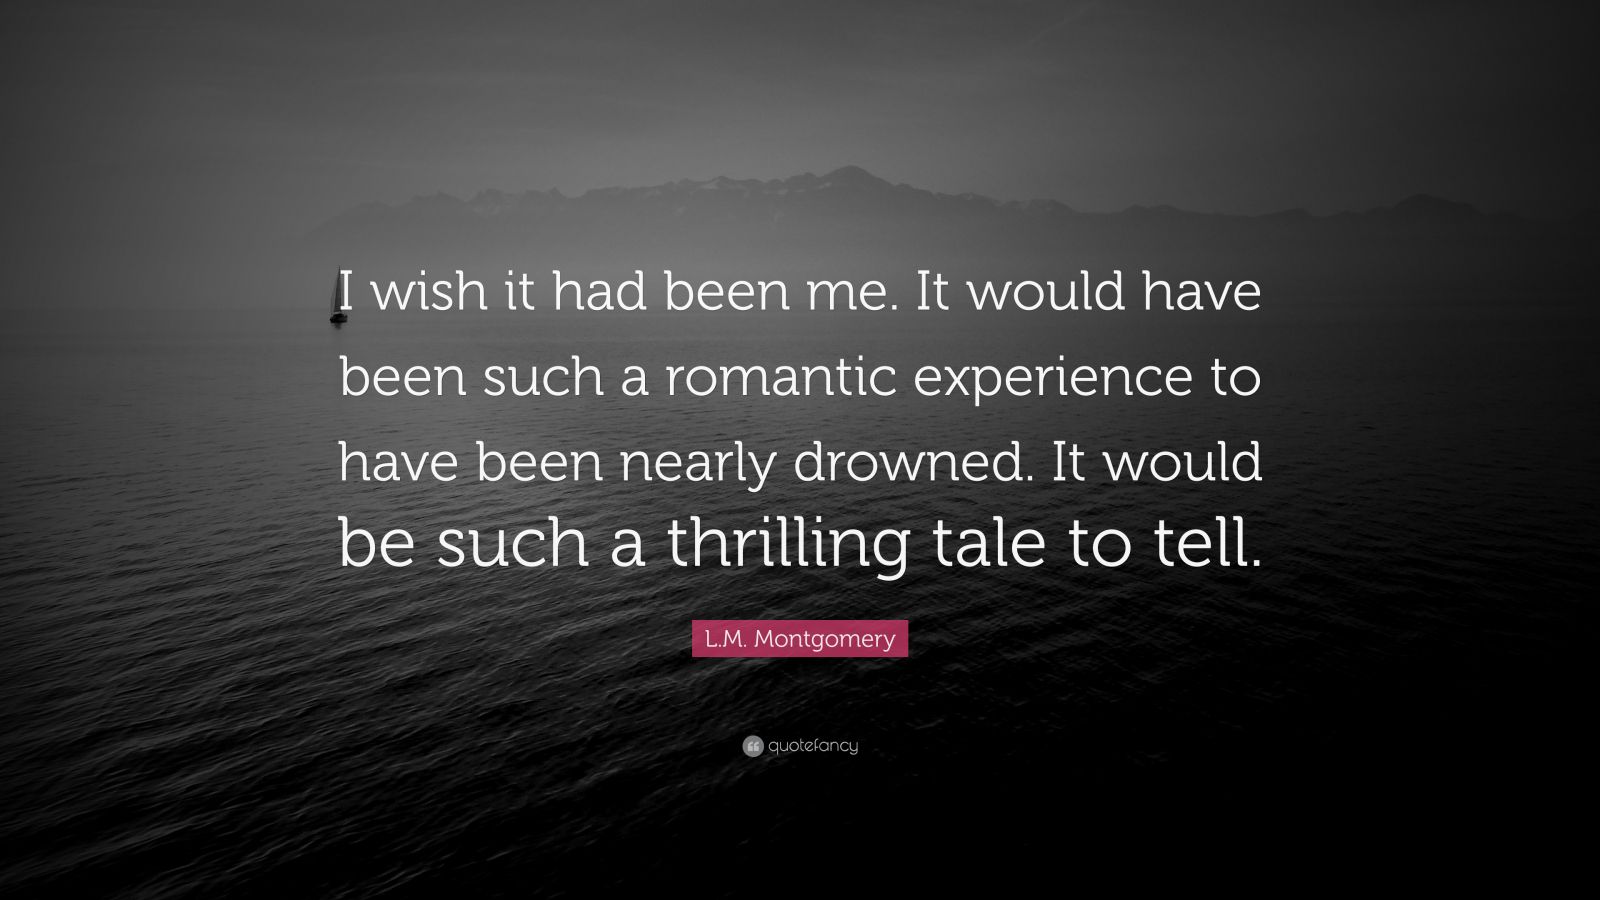 L.M. Montgomery Quote: “I wish it had been me. It would have been such ...